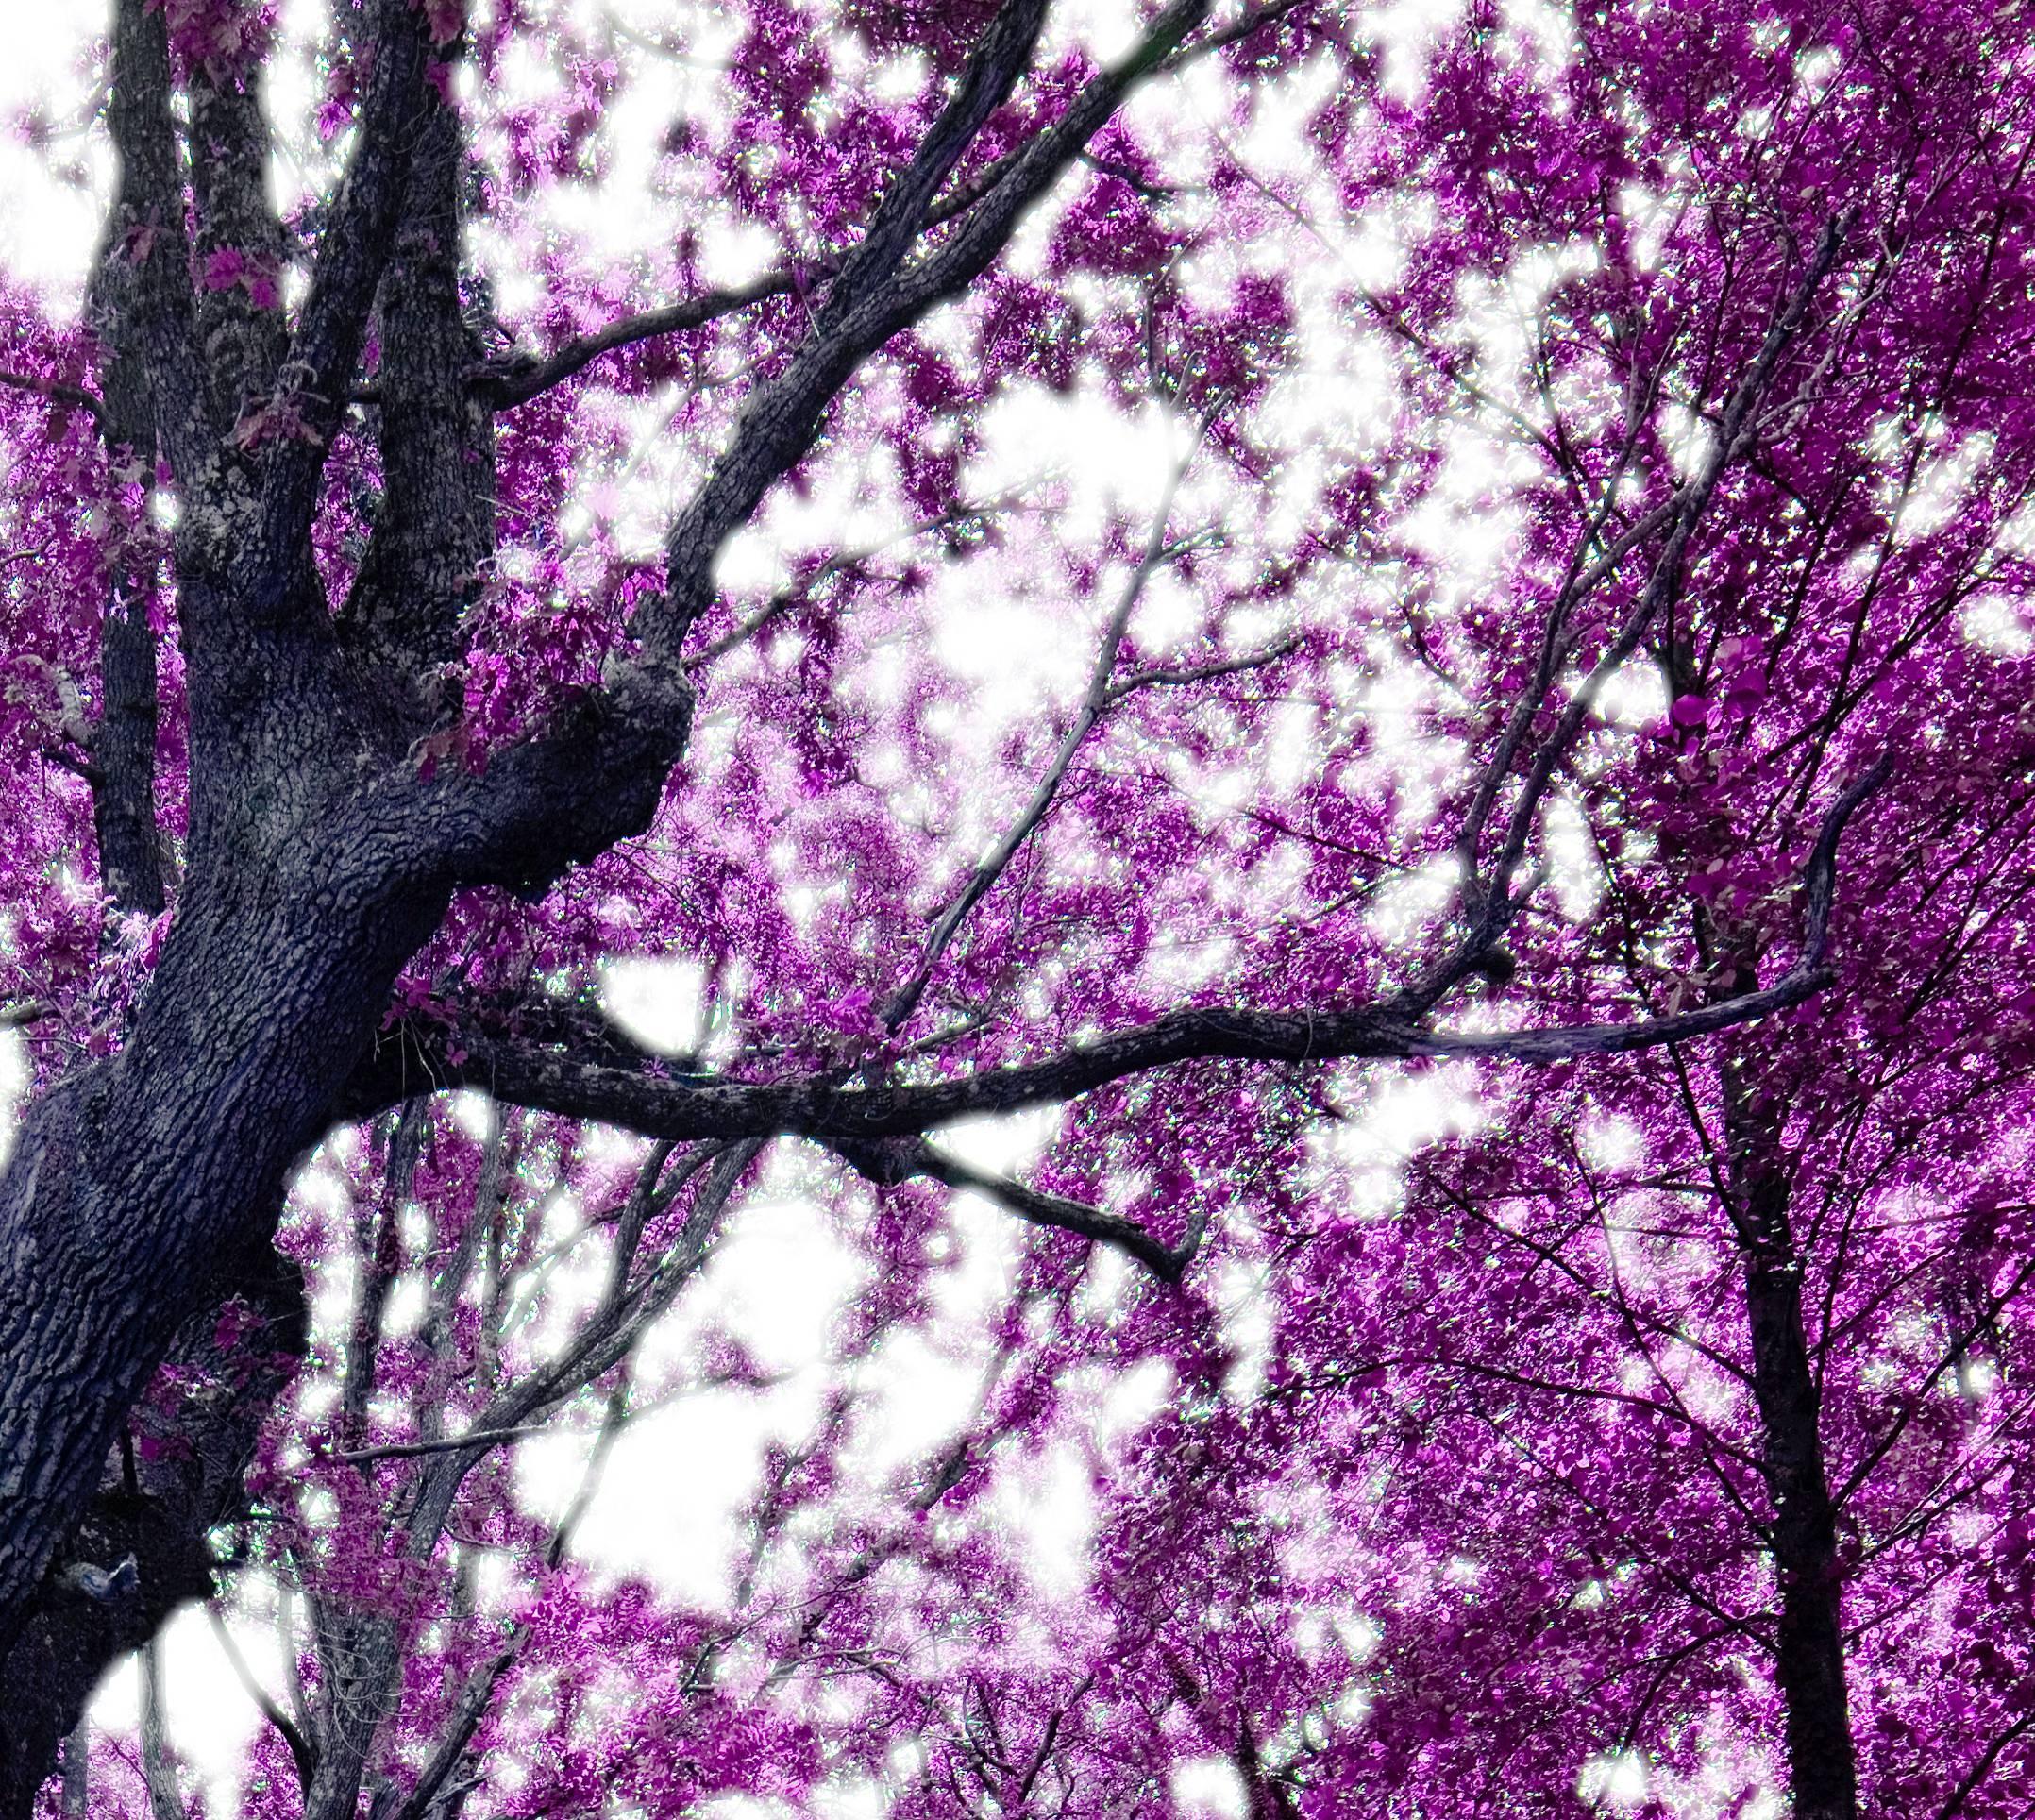 Wonderland, Landscape with old Tree, Magenta/Pink tone - Abstract Photograph by Albert Delamour